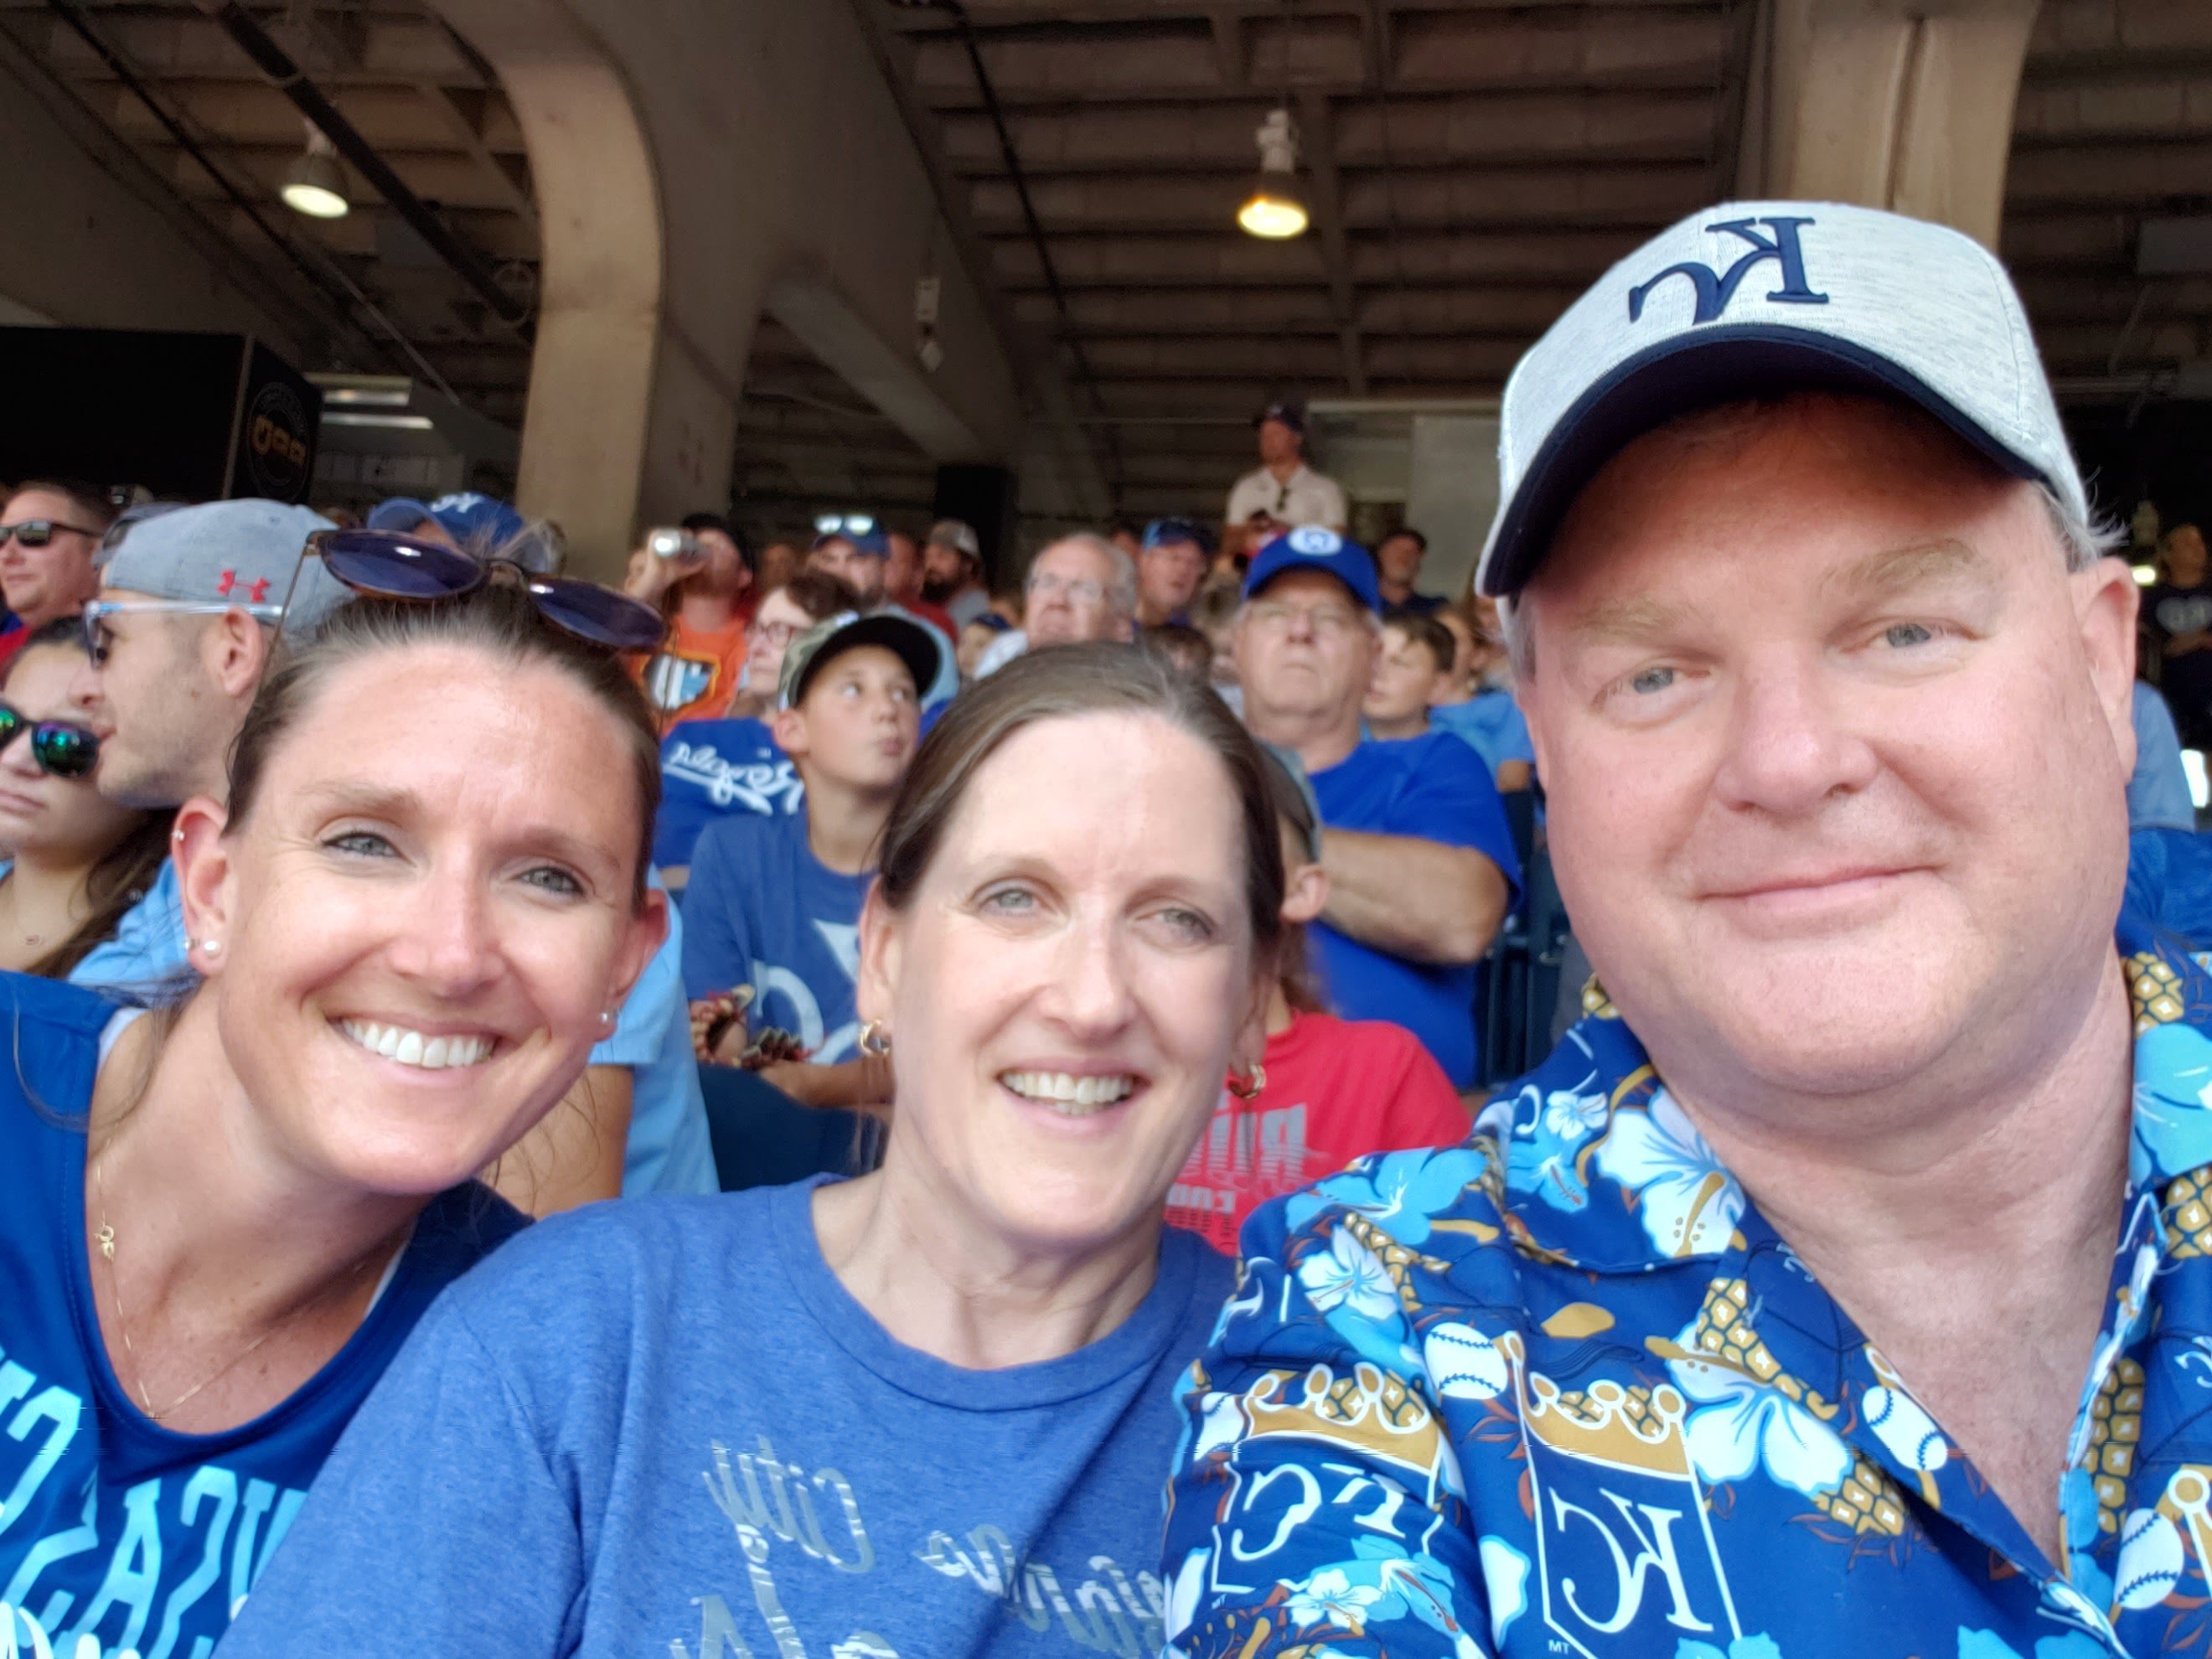 Lynn at Royals game with family